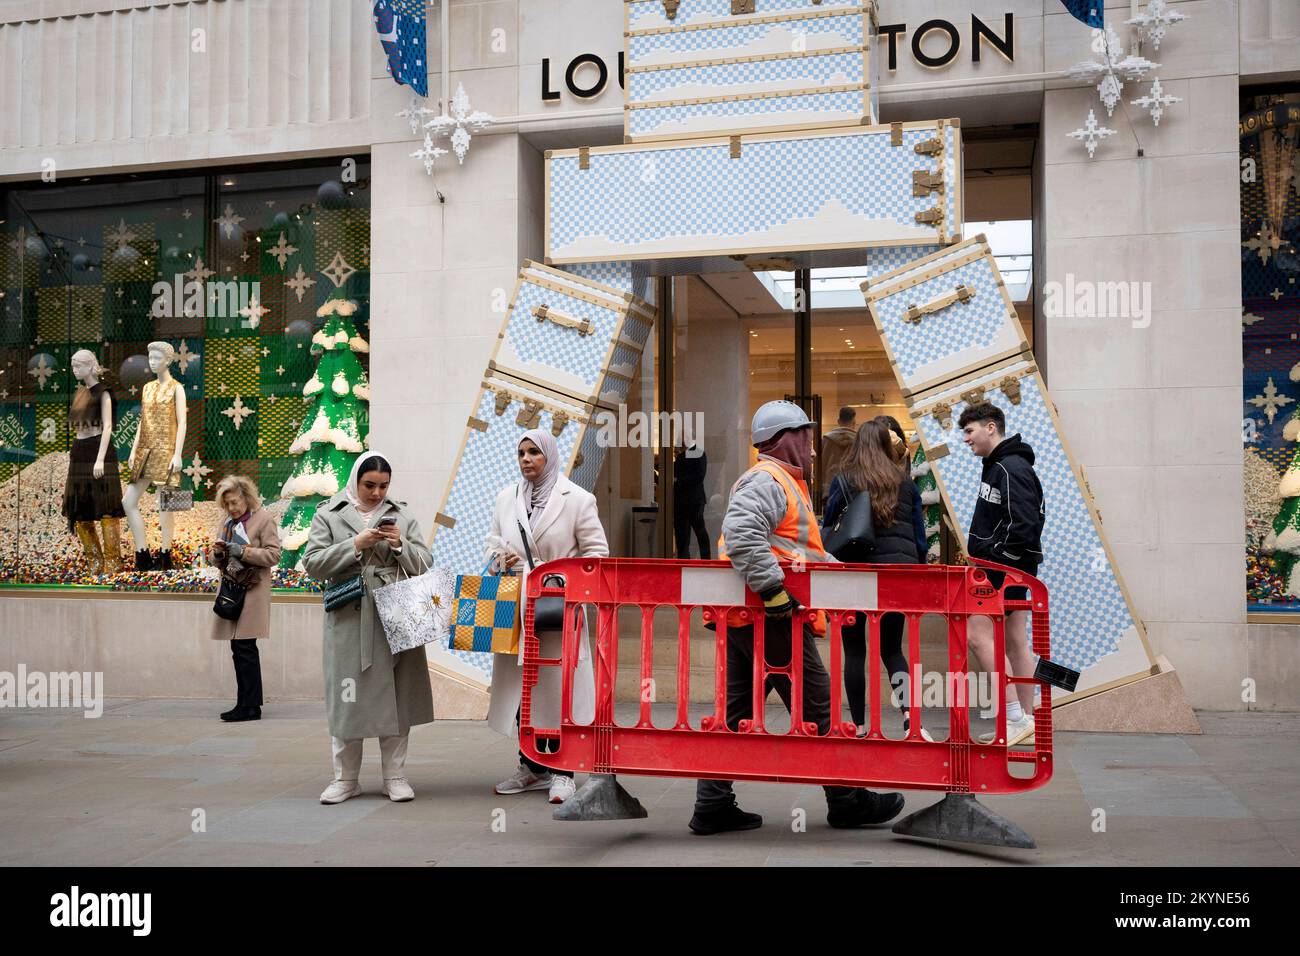 Louis vuitton window display london hi-res stock photography and images -  Page 2 - Alamy